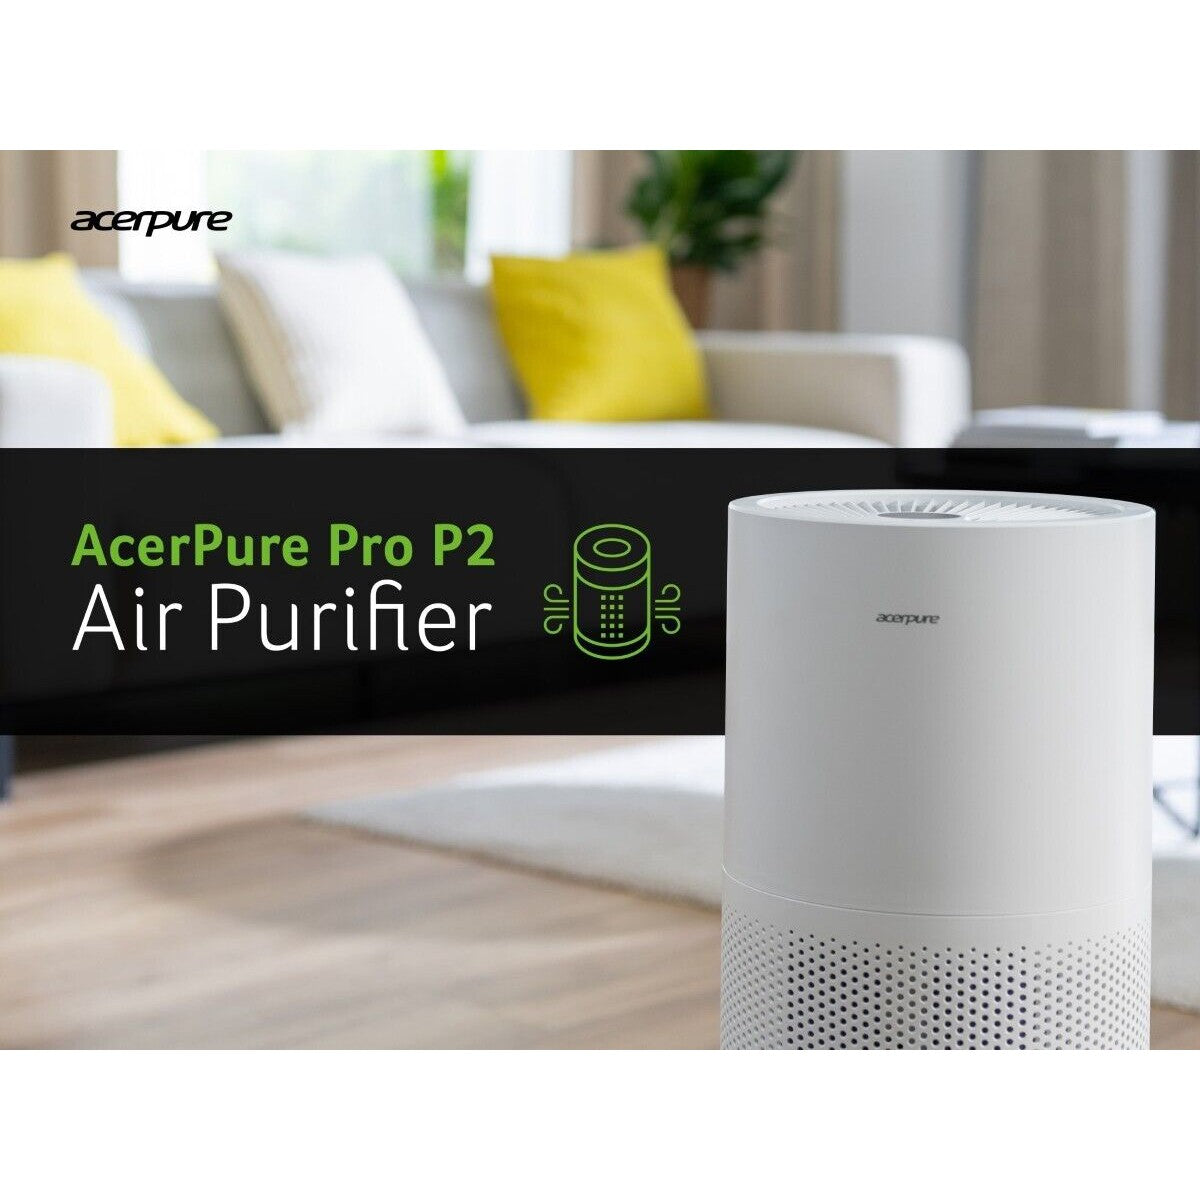 Acer AcerPure Pro P2 Air Purifier 4-in-1 HEPA Filter Quiet ZL.ACCTG.057 White